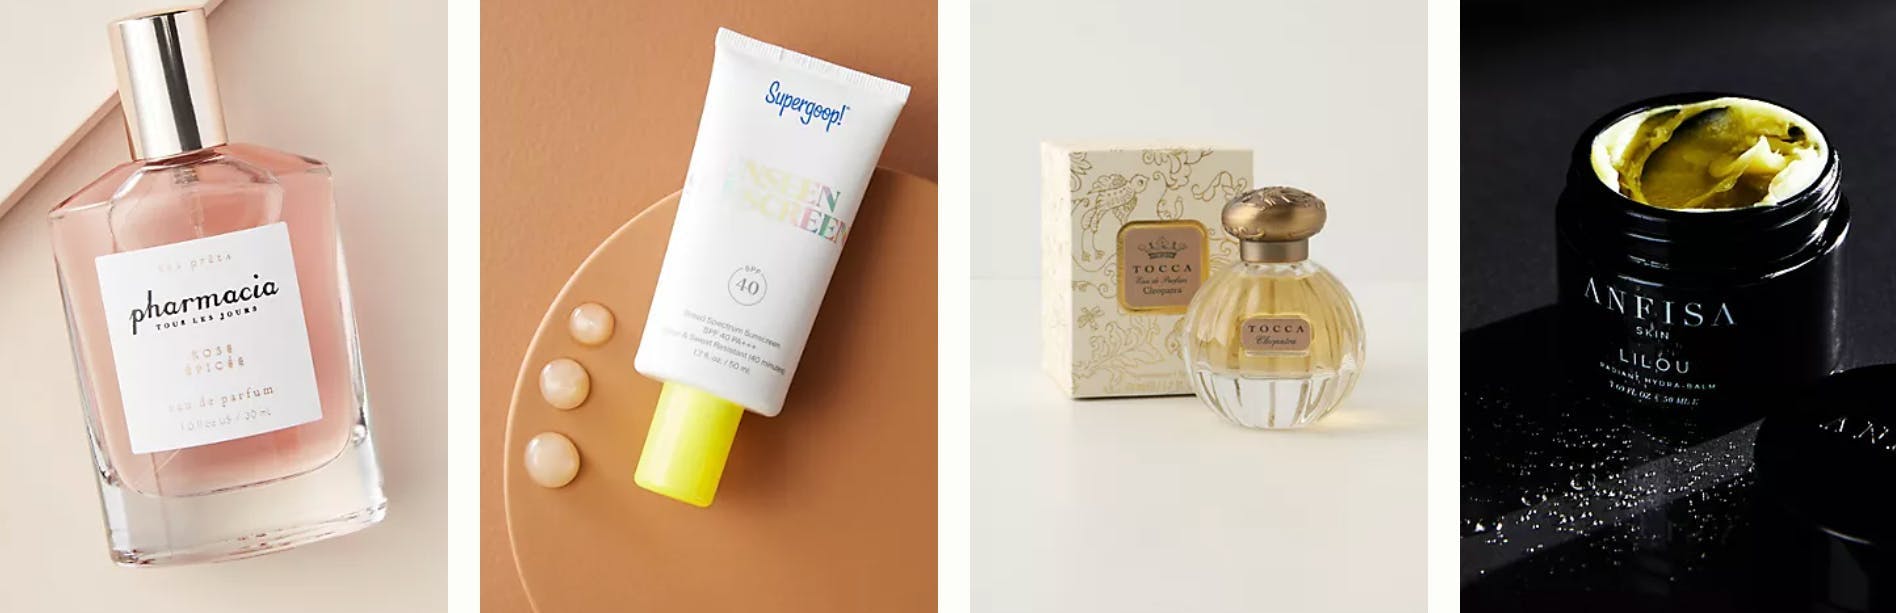 Popular products of Anthropologie  for Beauty